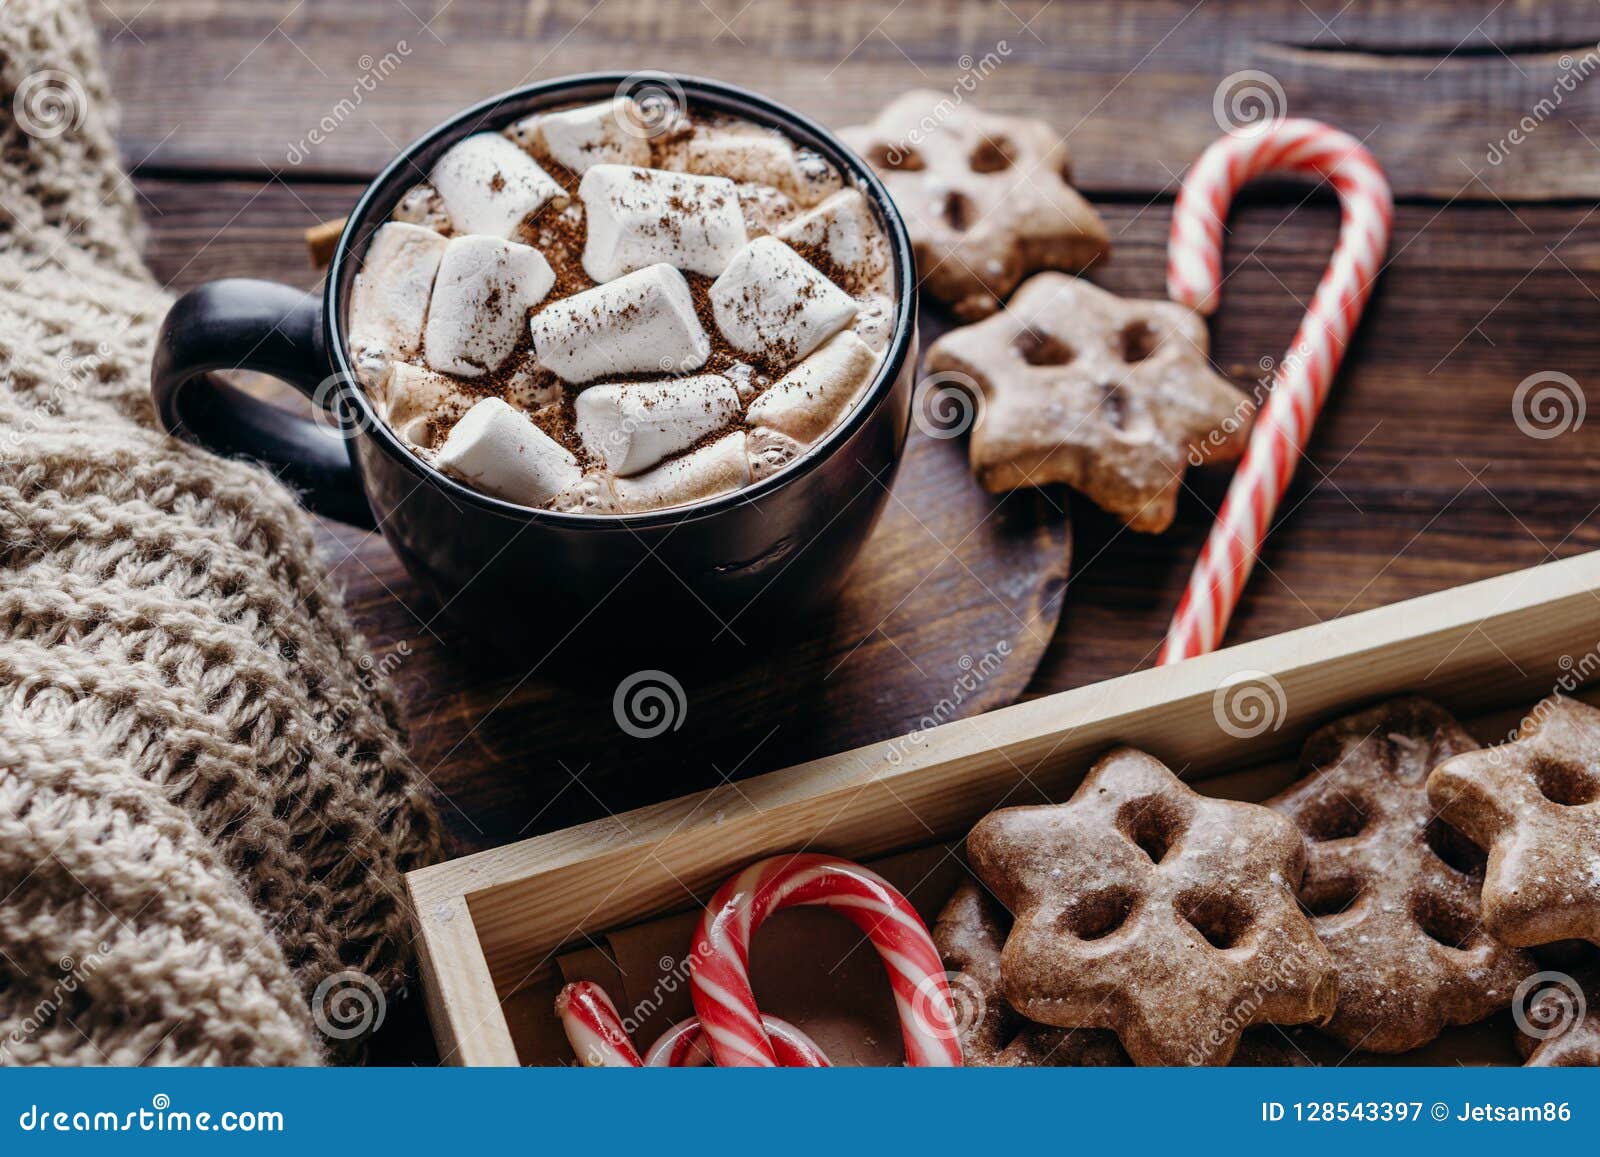 Hot Chocolate, Winter Sweets and Knitted Blanket Stock Image - Image of ...